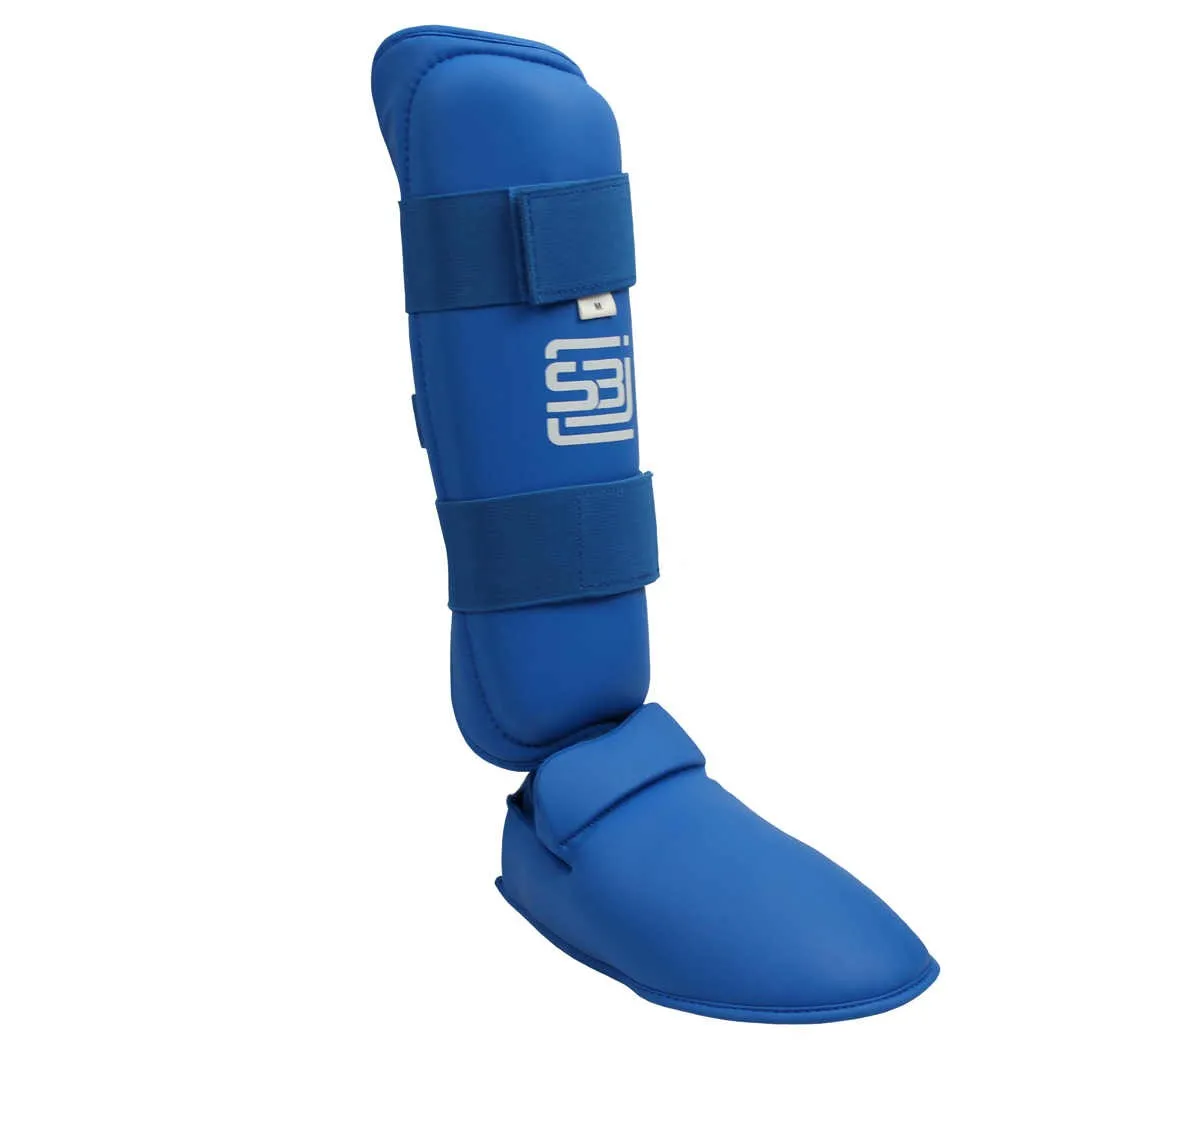 Shin guard instep protection blue for karate and kickboxing